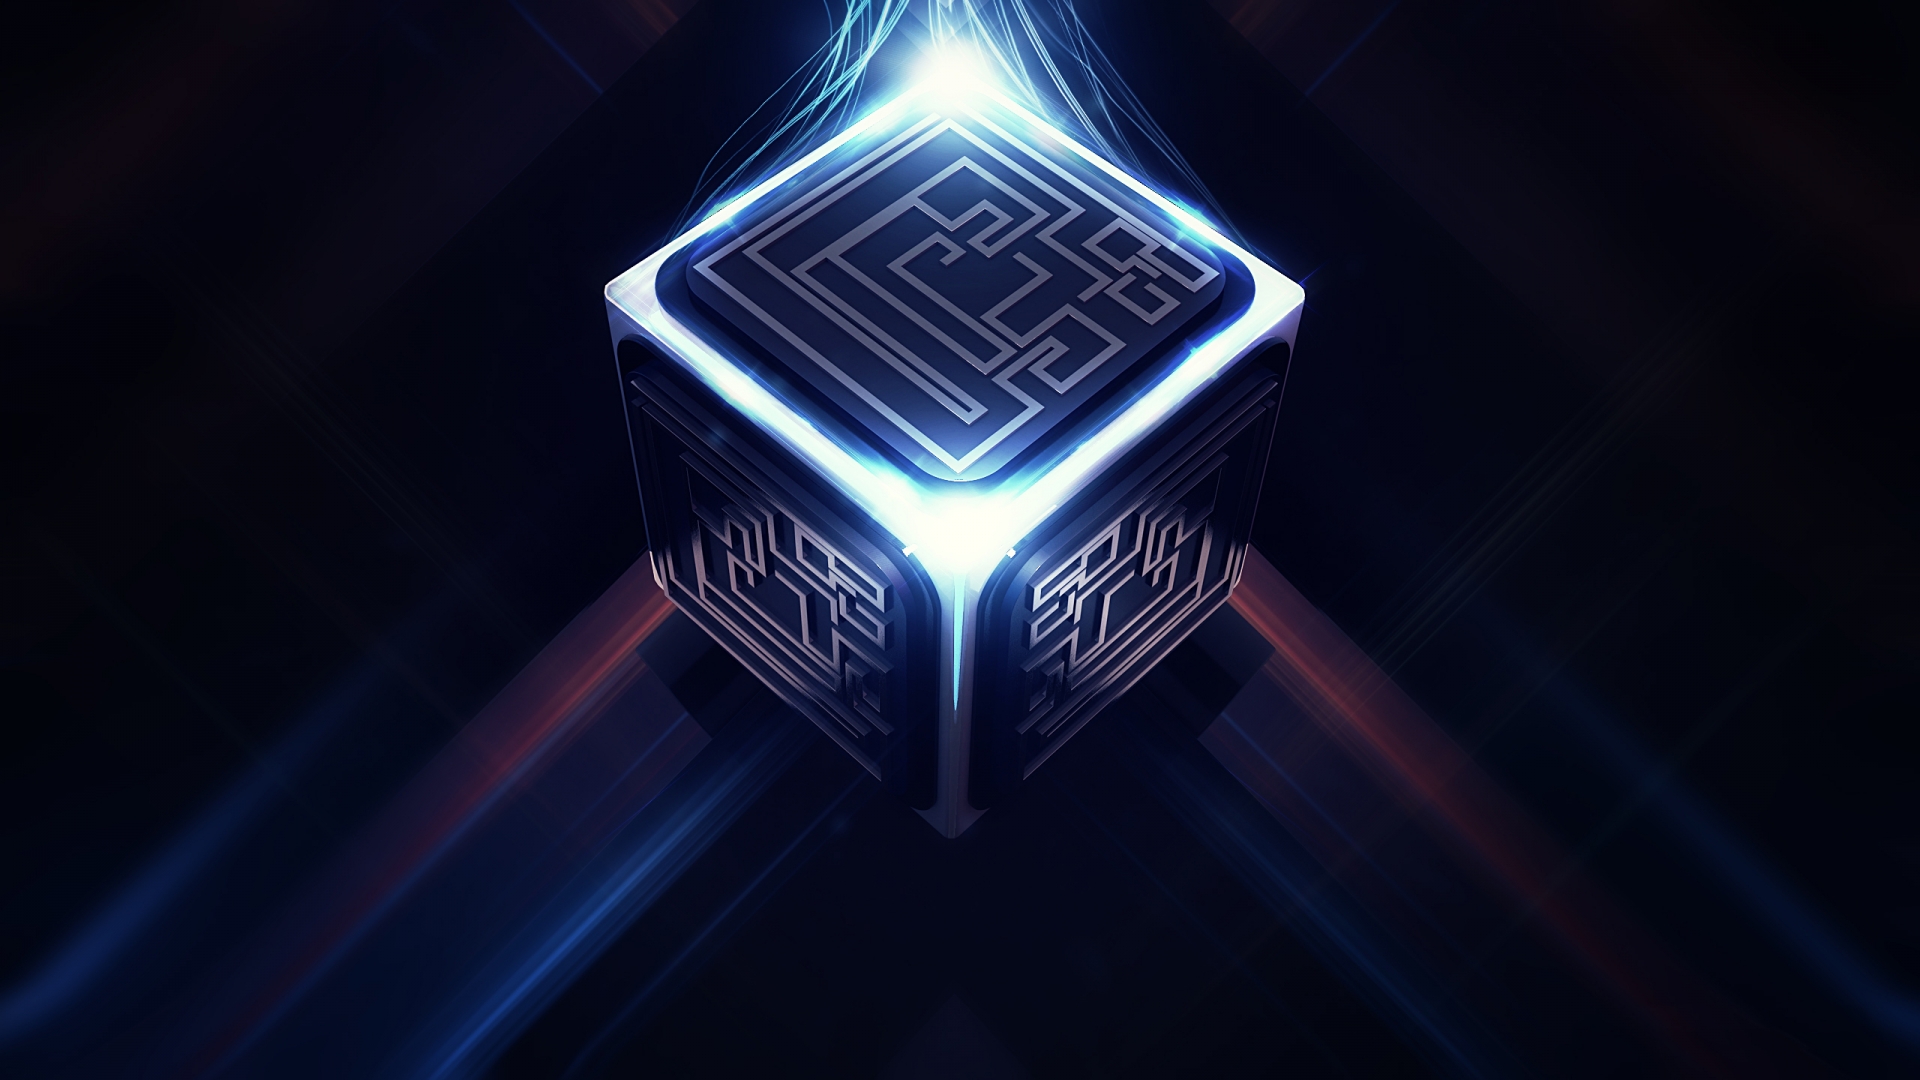 3D Cube Maze for 1920 x 1080 HDTV 1080p resolution